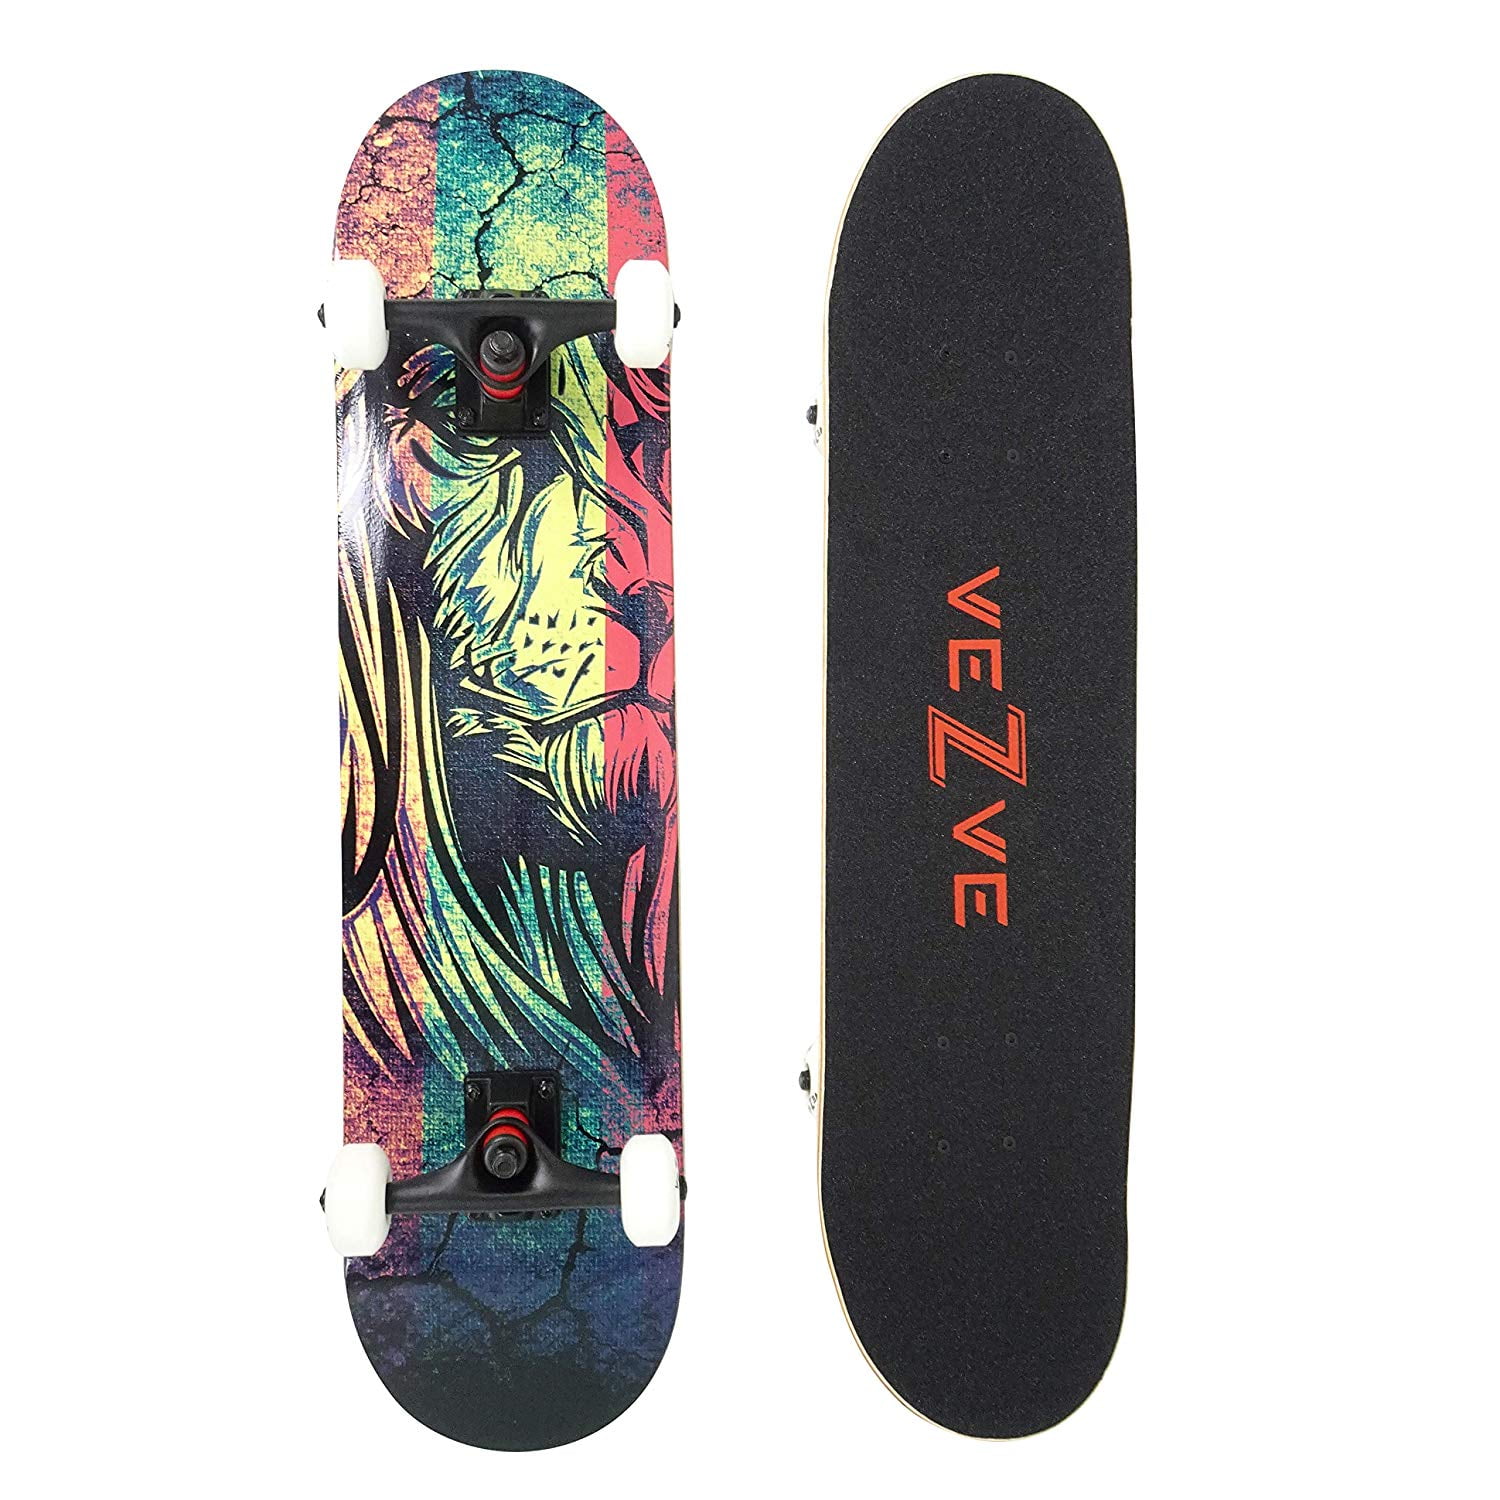 Complete Skateboard For Adult & Kids 31"x7.75" Double Kick 7-Ply Maple Outdoor 